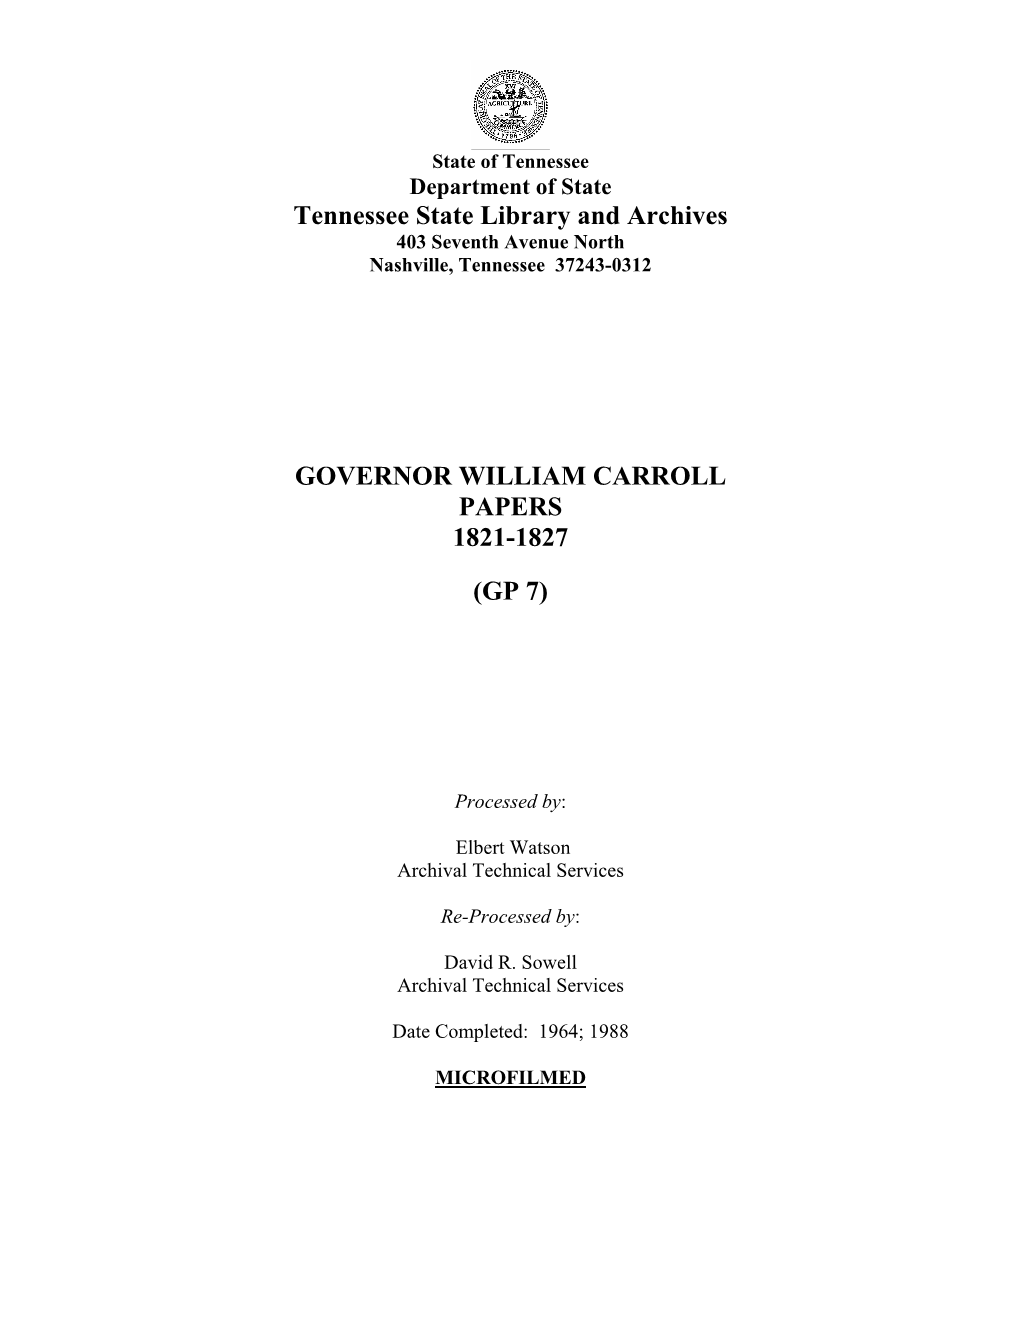 Governor William Carroll Papers 1821-1827